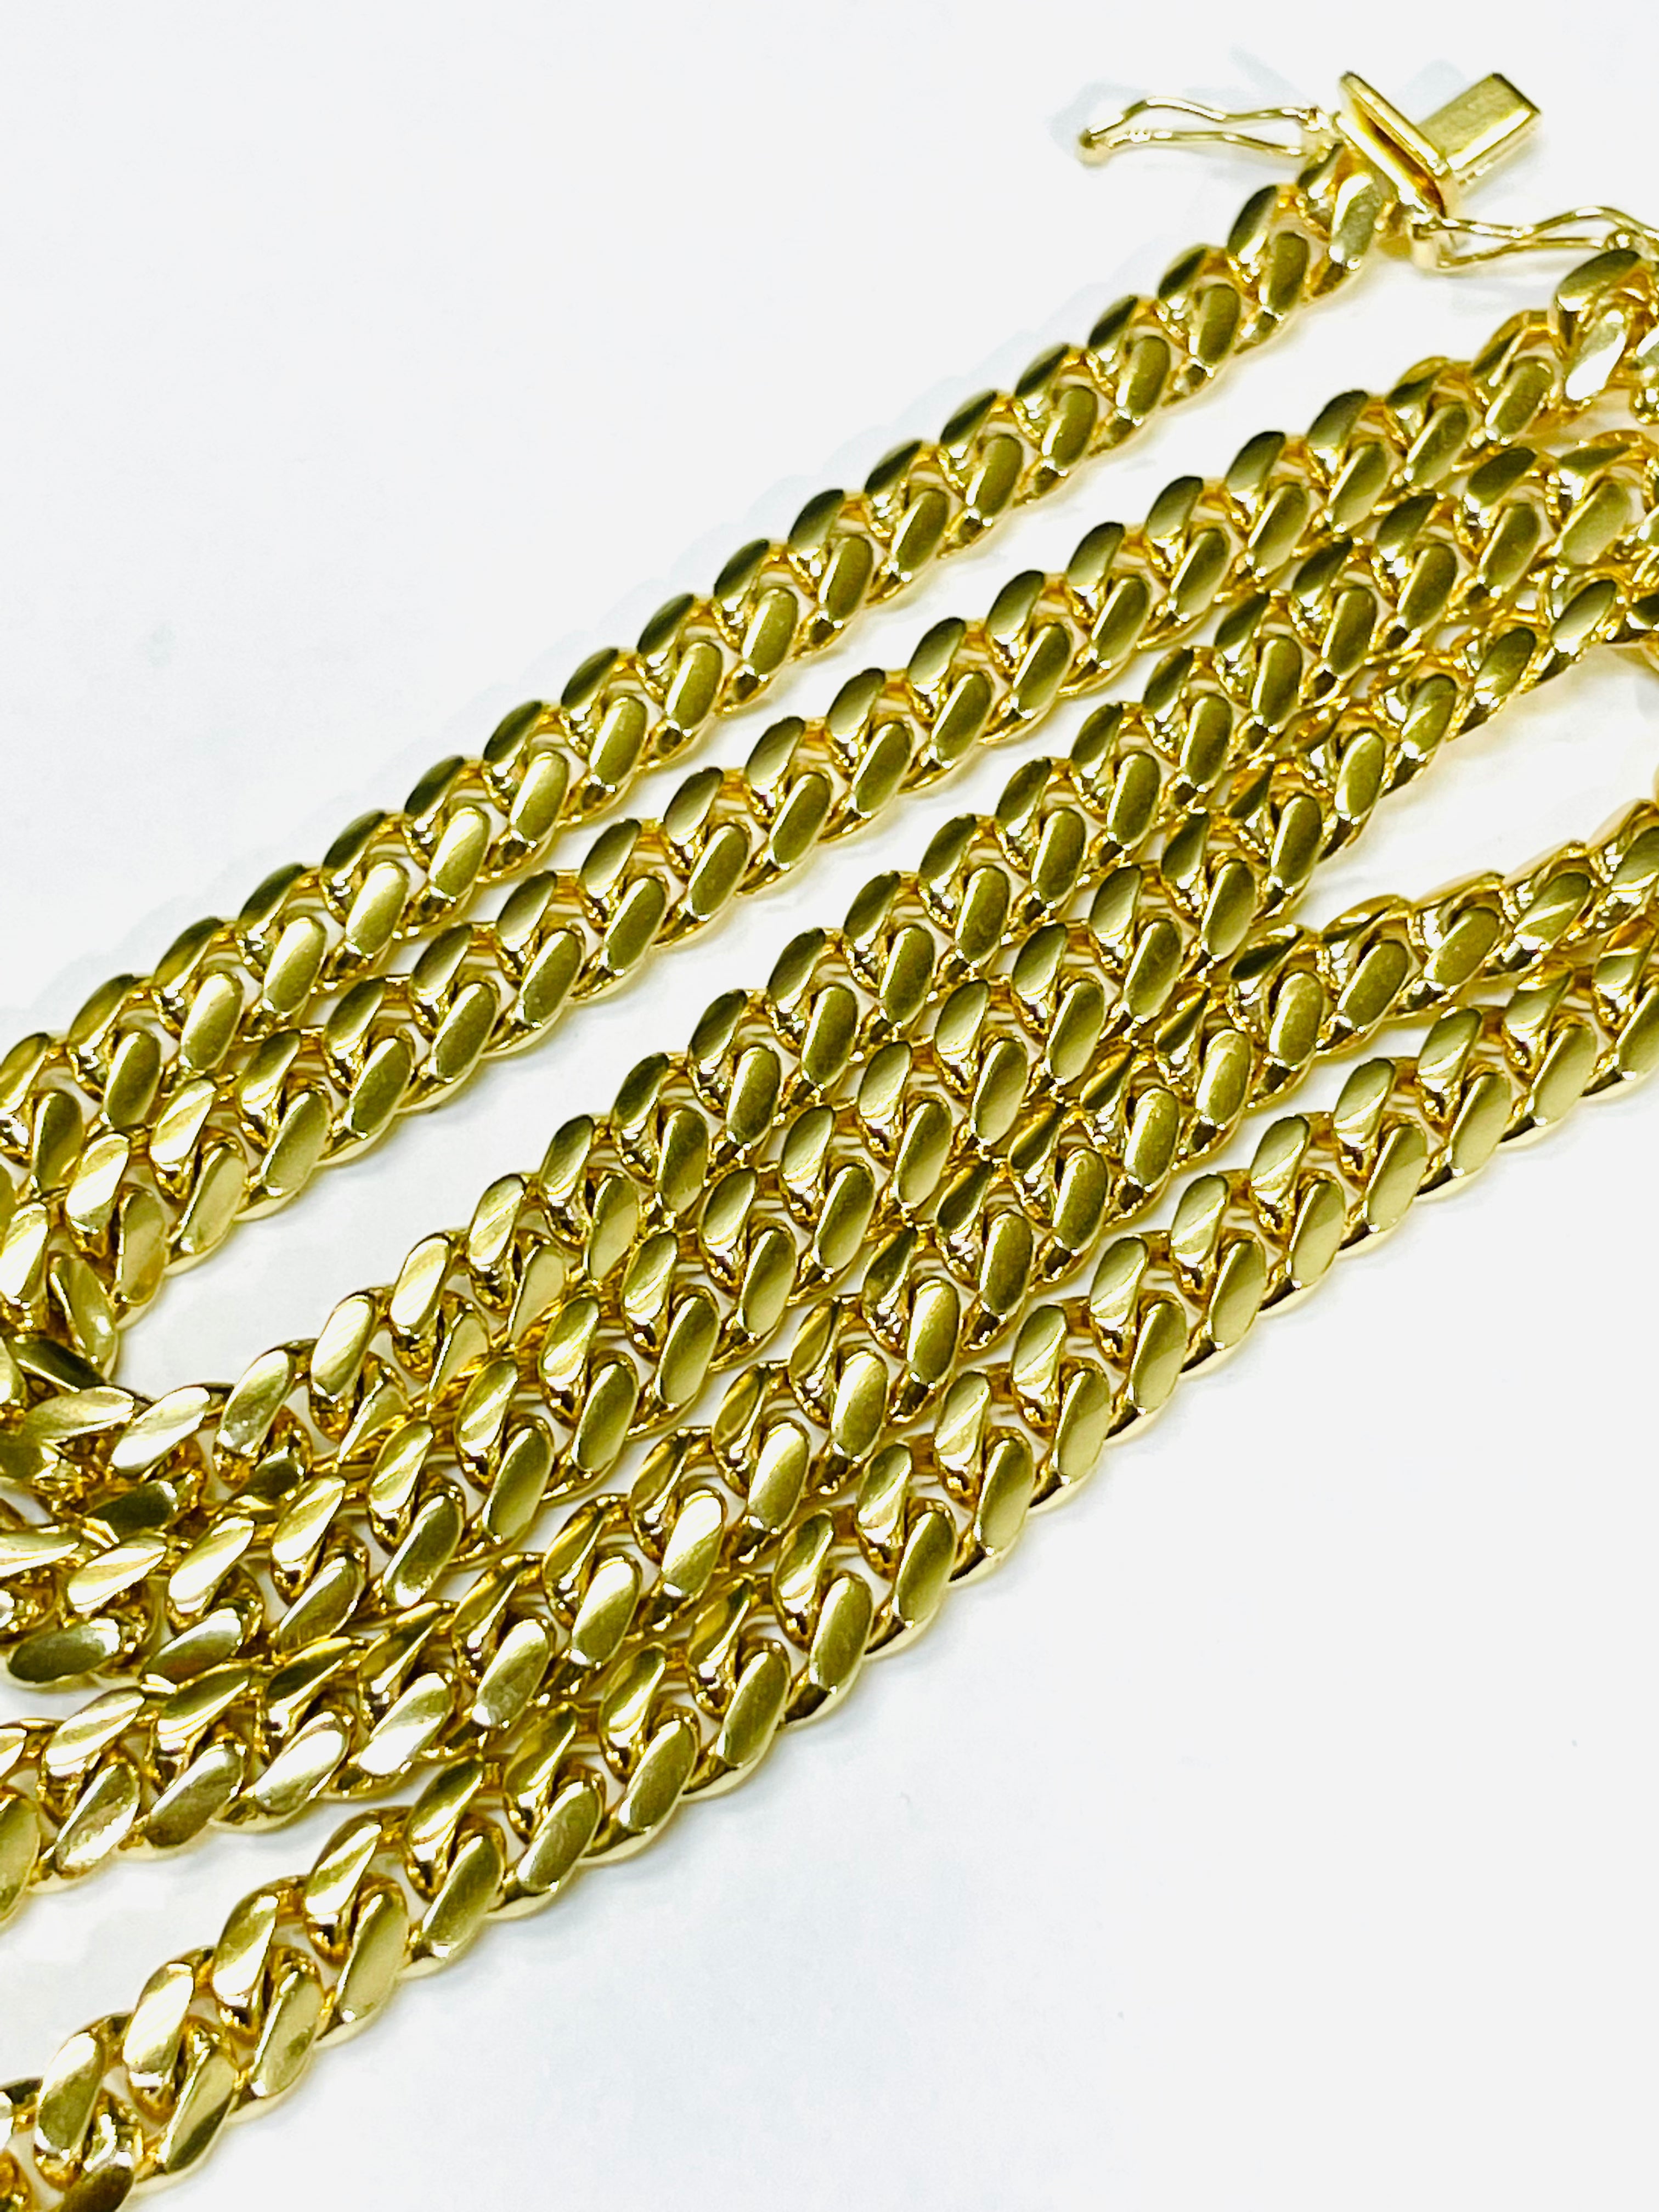 22” 6mm Solid 14K Yellow Gold Cuban Link Chain Necklace